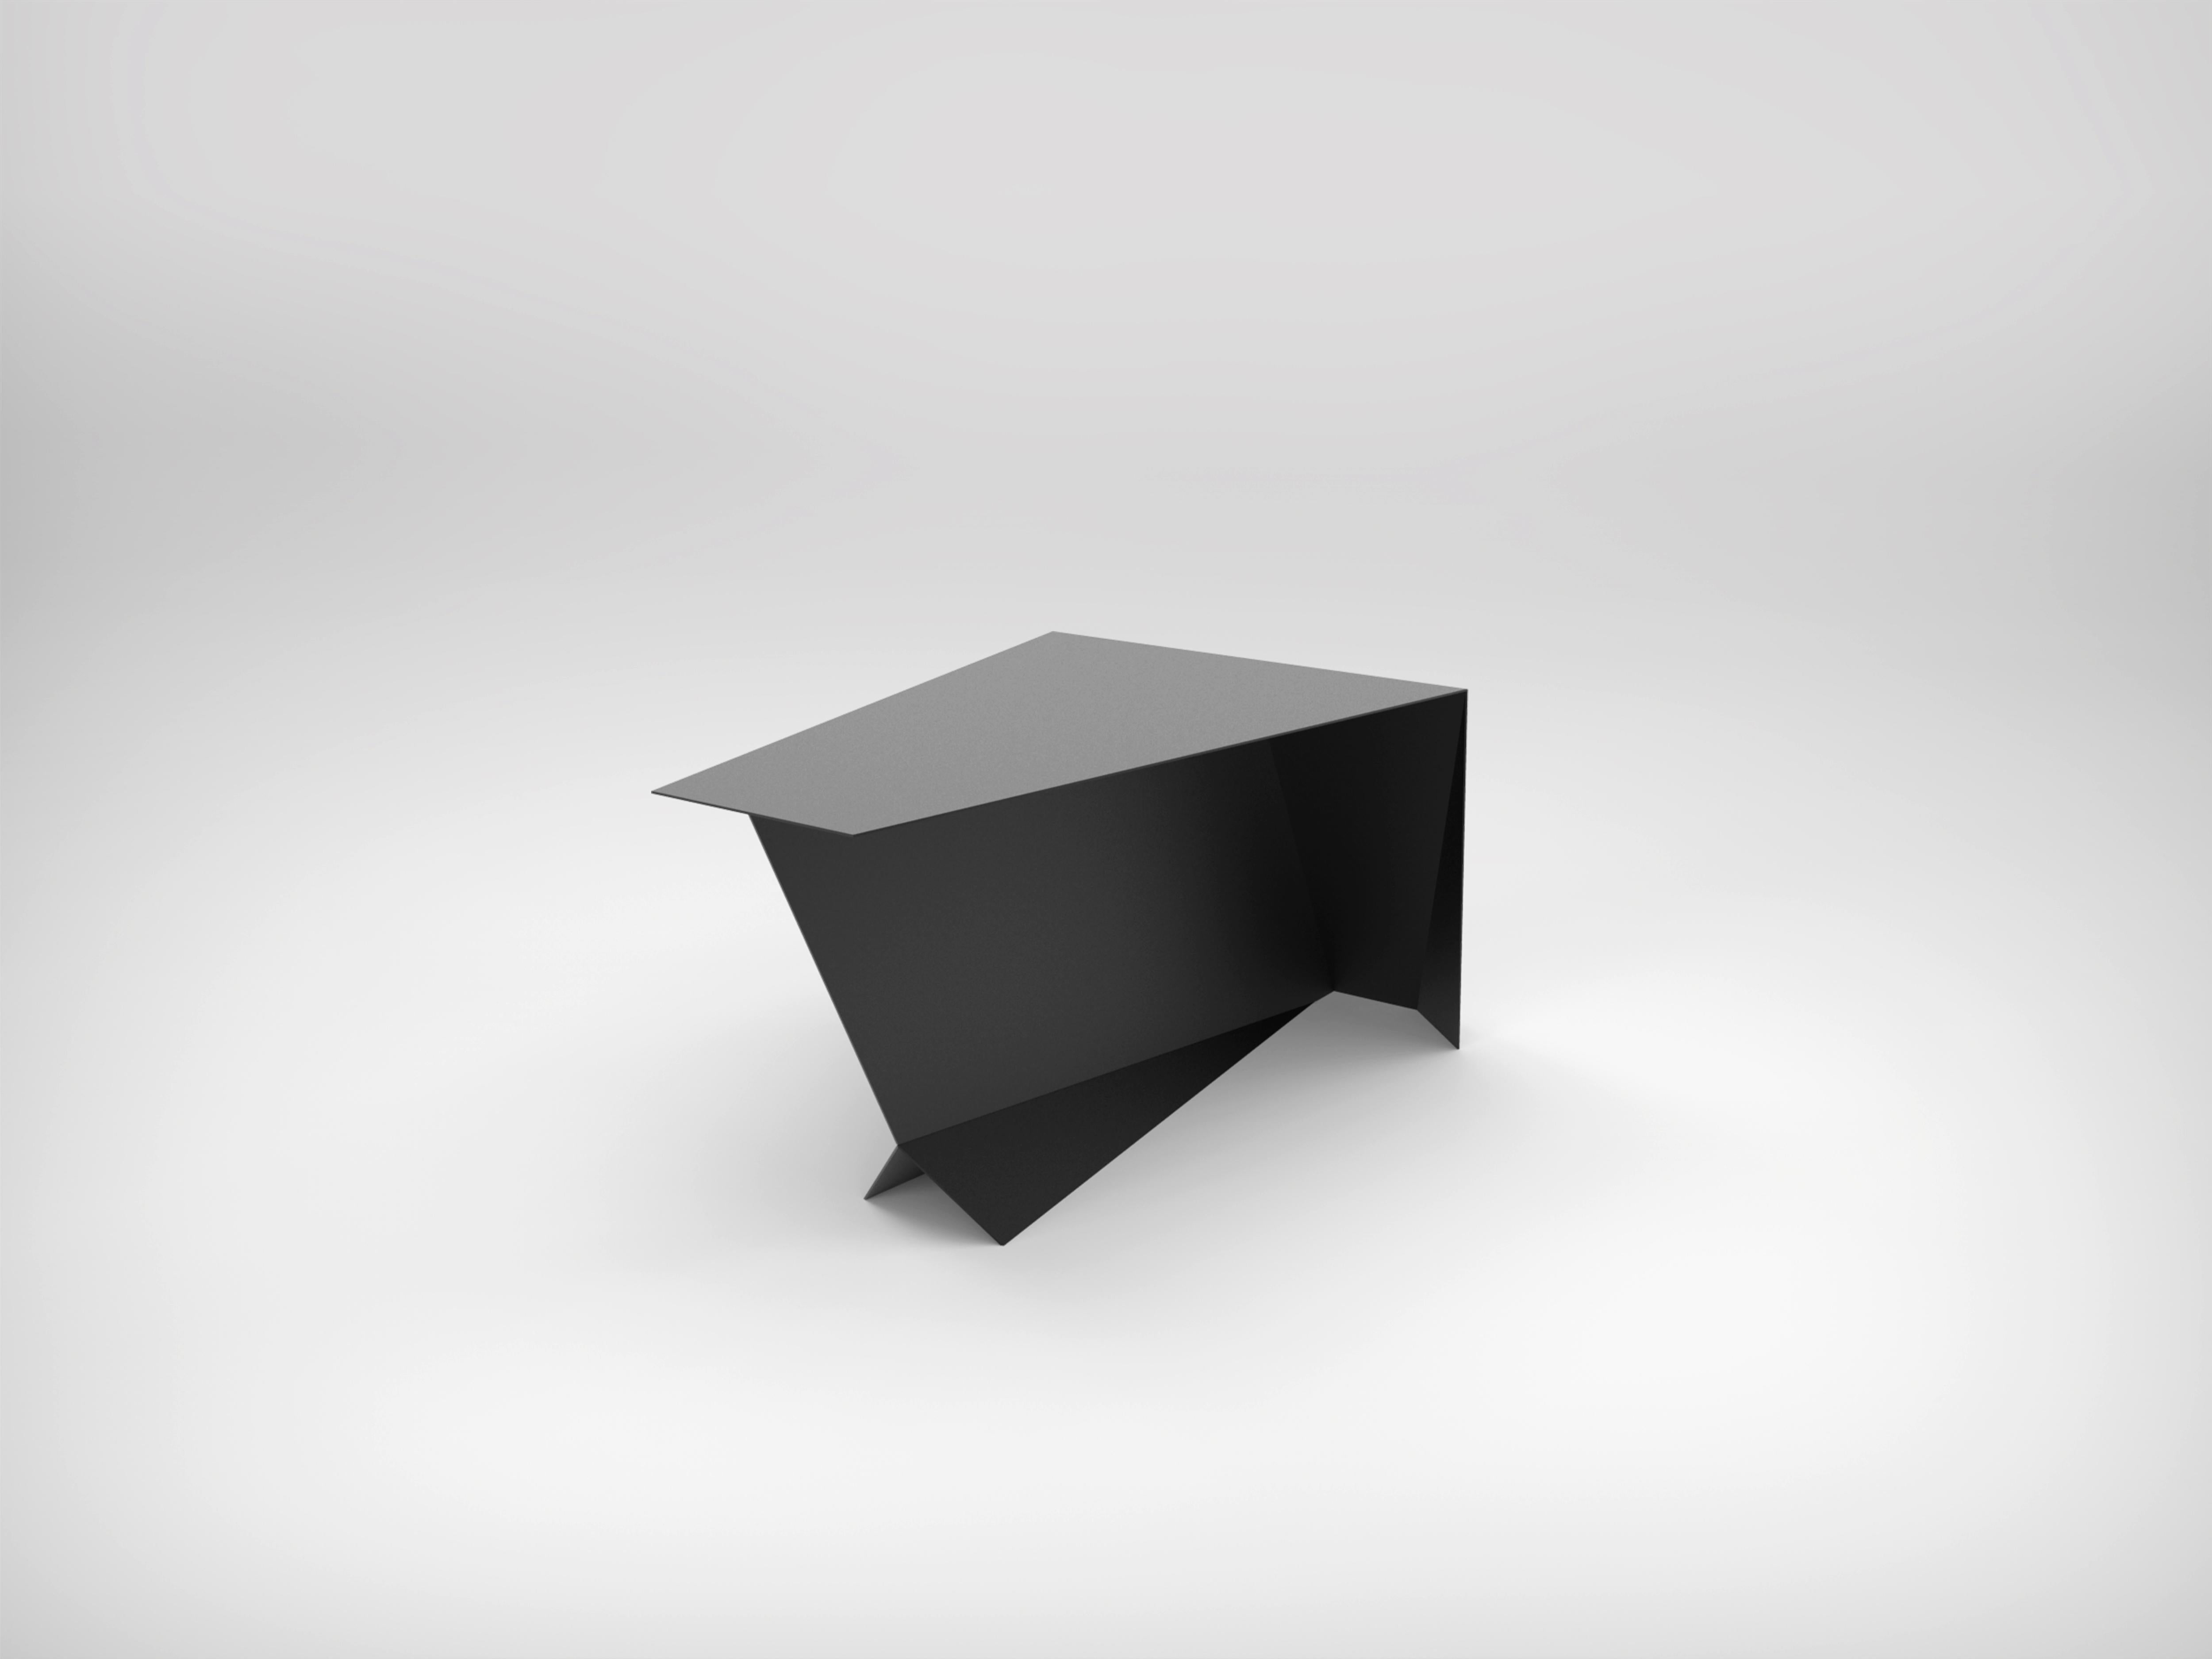 Pegasus side table is conceived by 06d design studio.

Black steel. Matt finish.
Measure: 38 x 81 x 44 cm

Limited edition of 33 pieces.